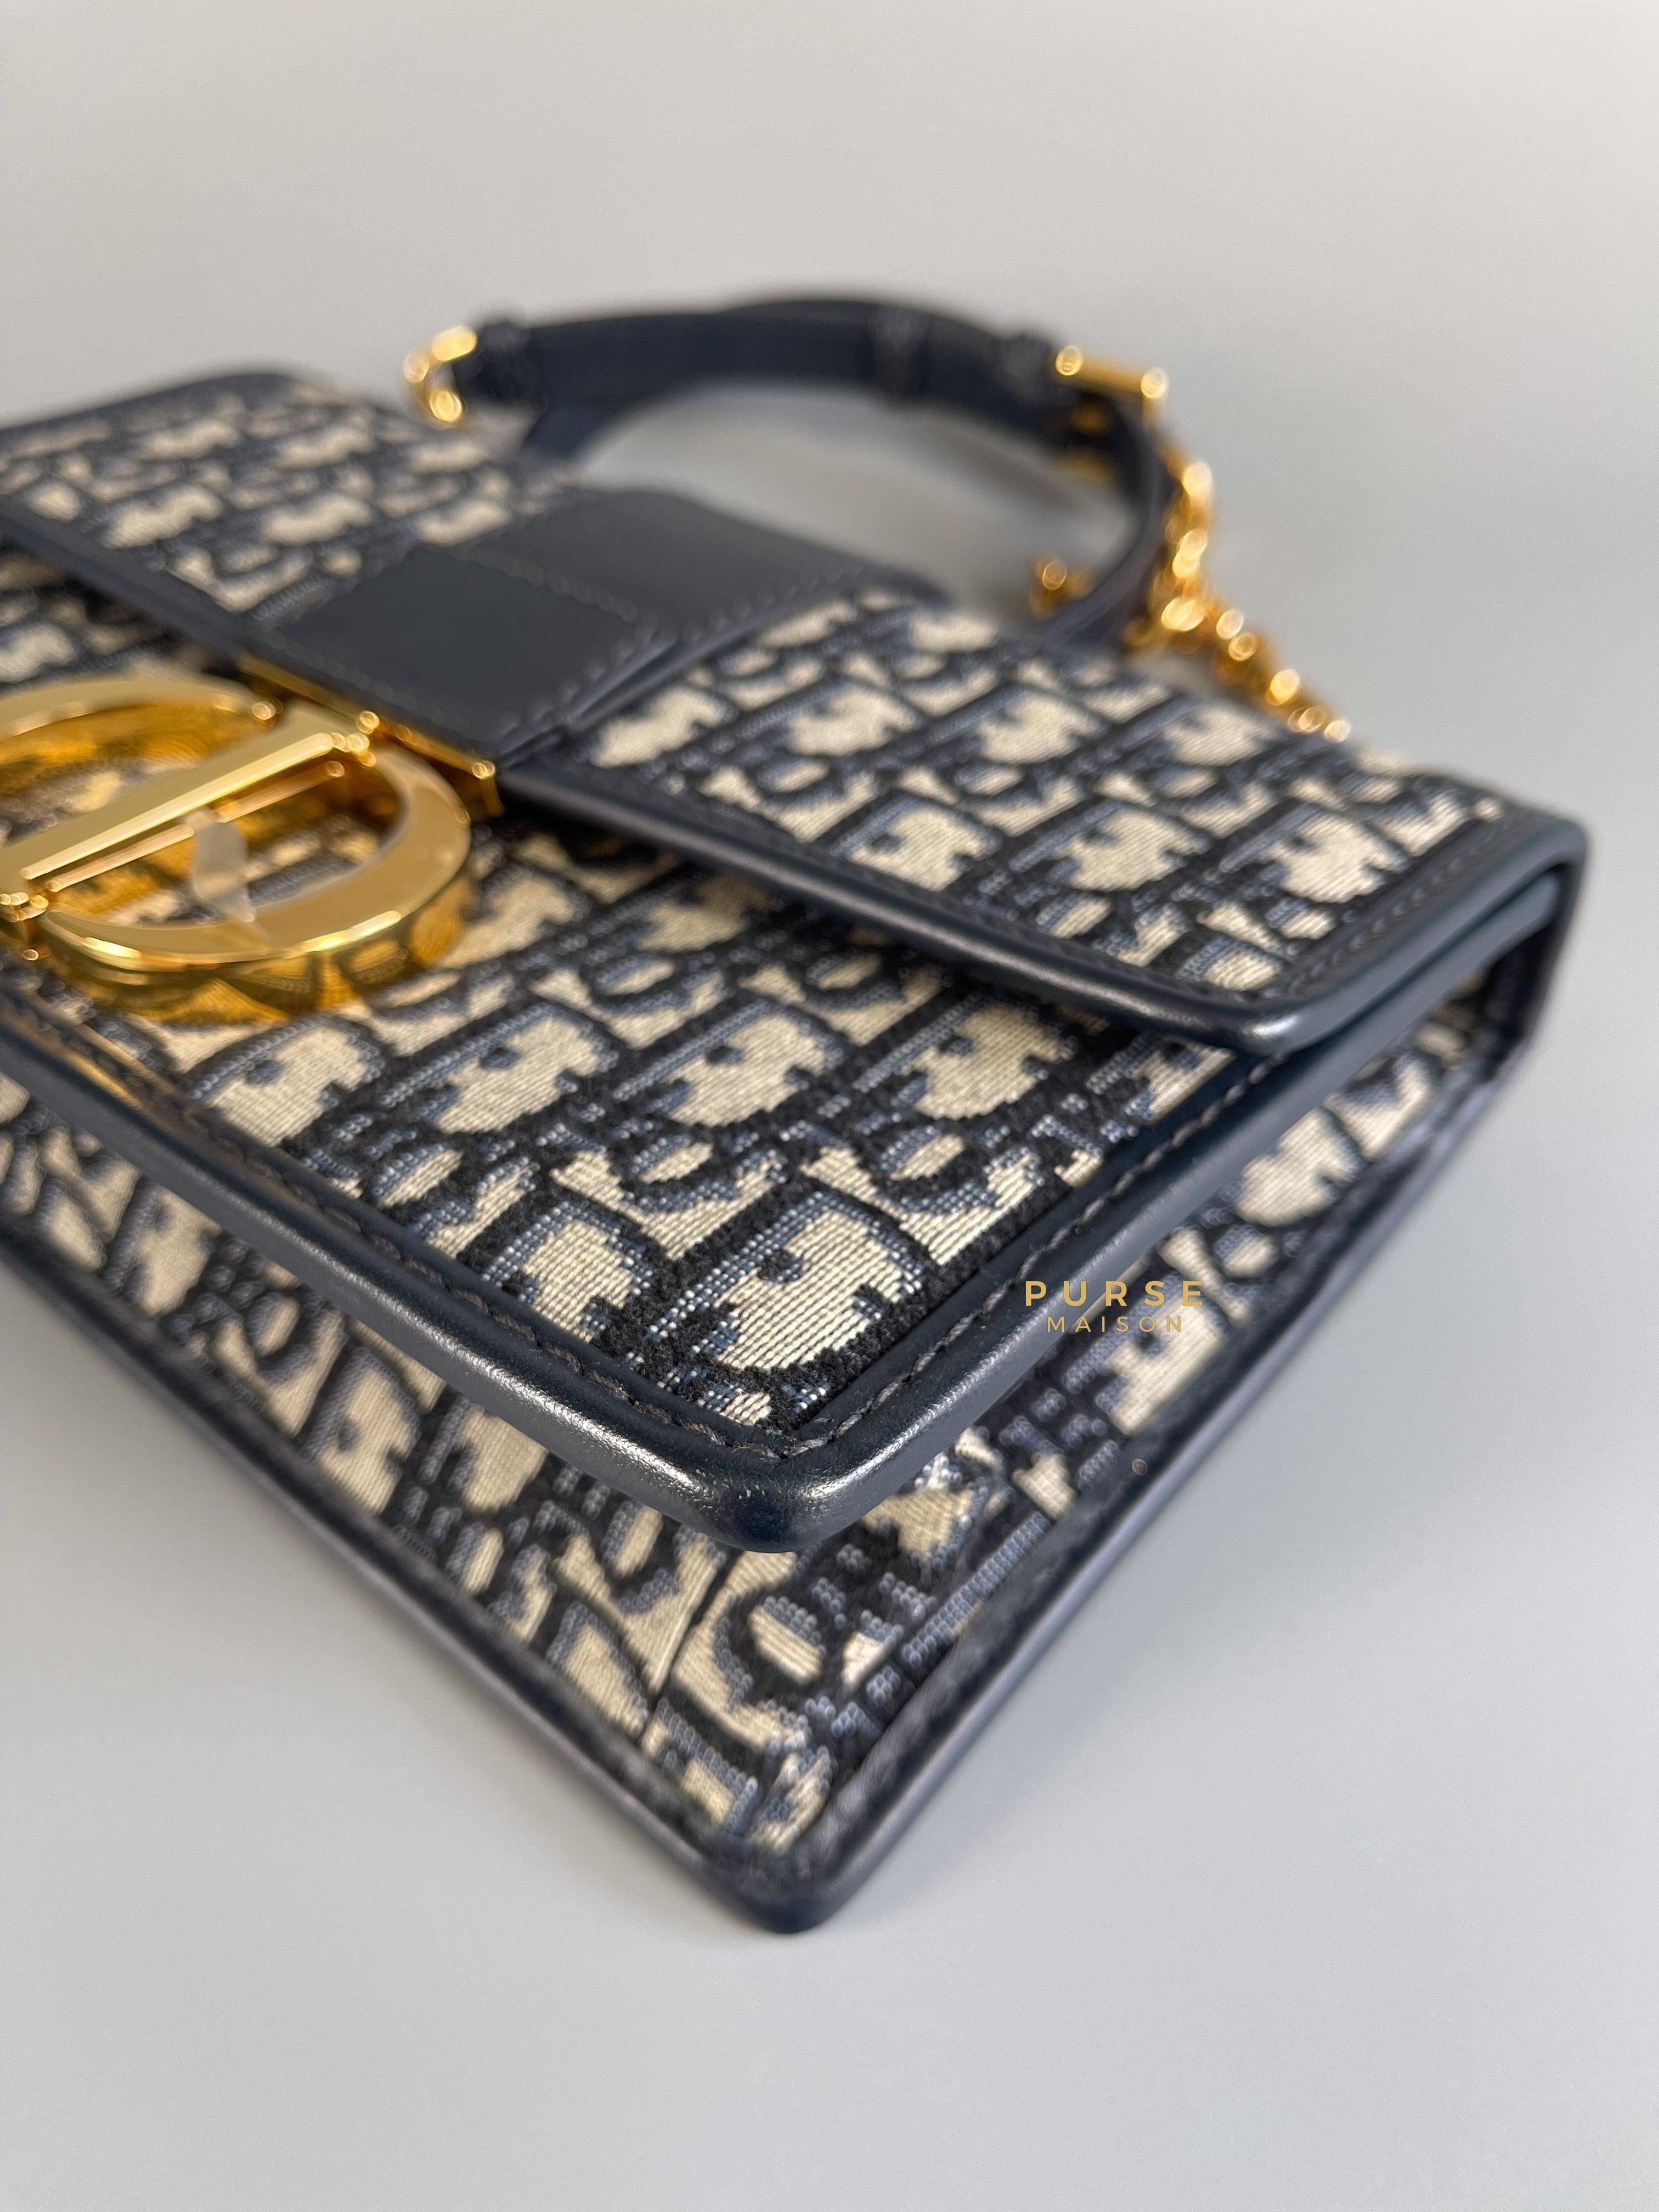 Christian Dior Montaigne 30 Oblique Embroidery Chain Bag in Gold Hardware | Purse Maison Luxury Bags Shop